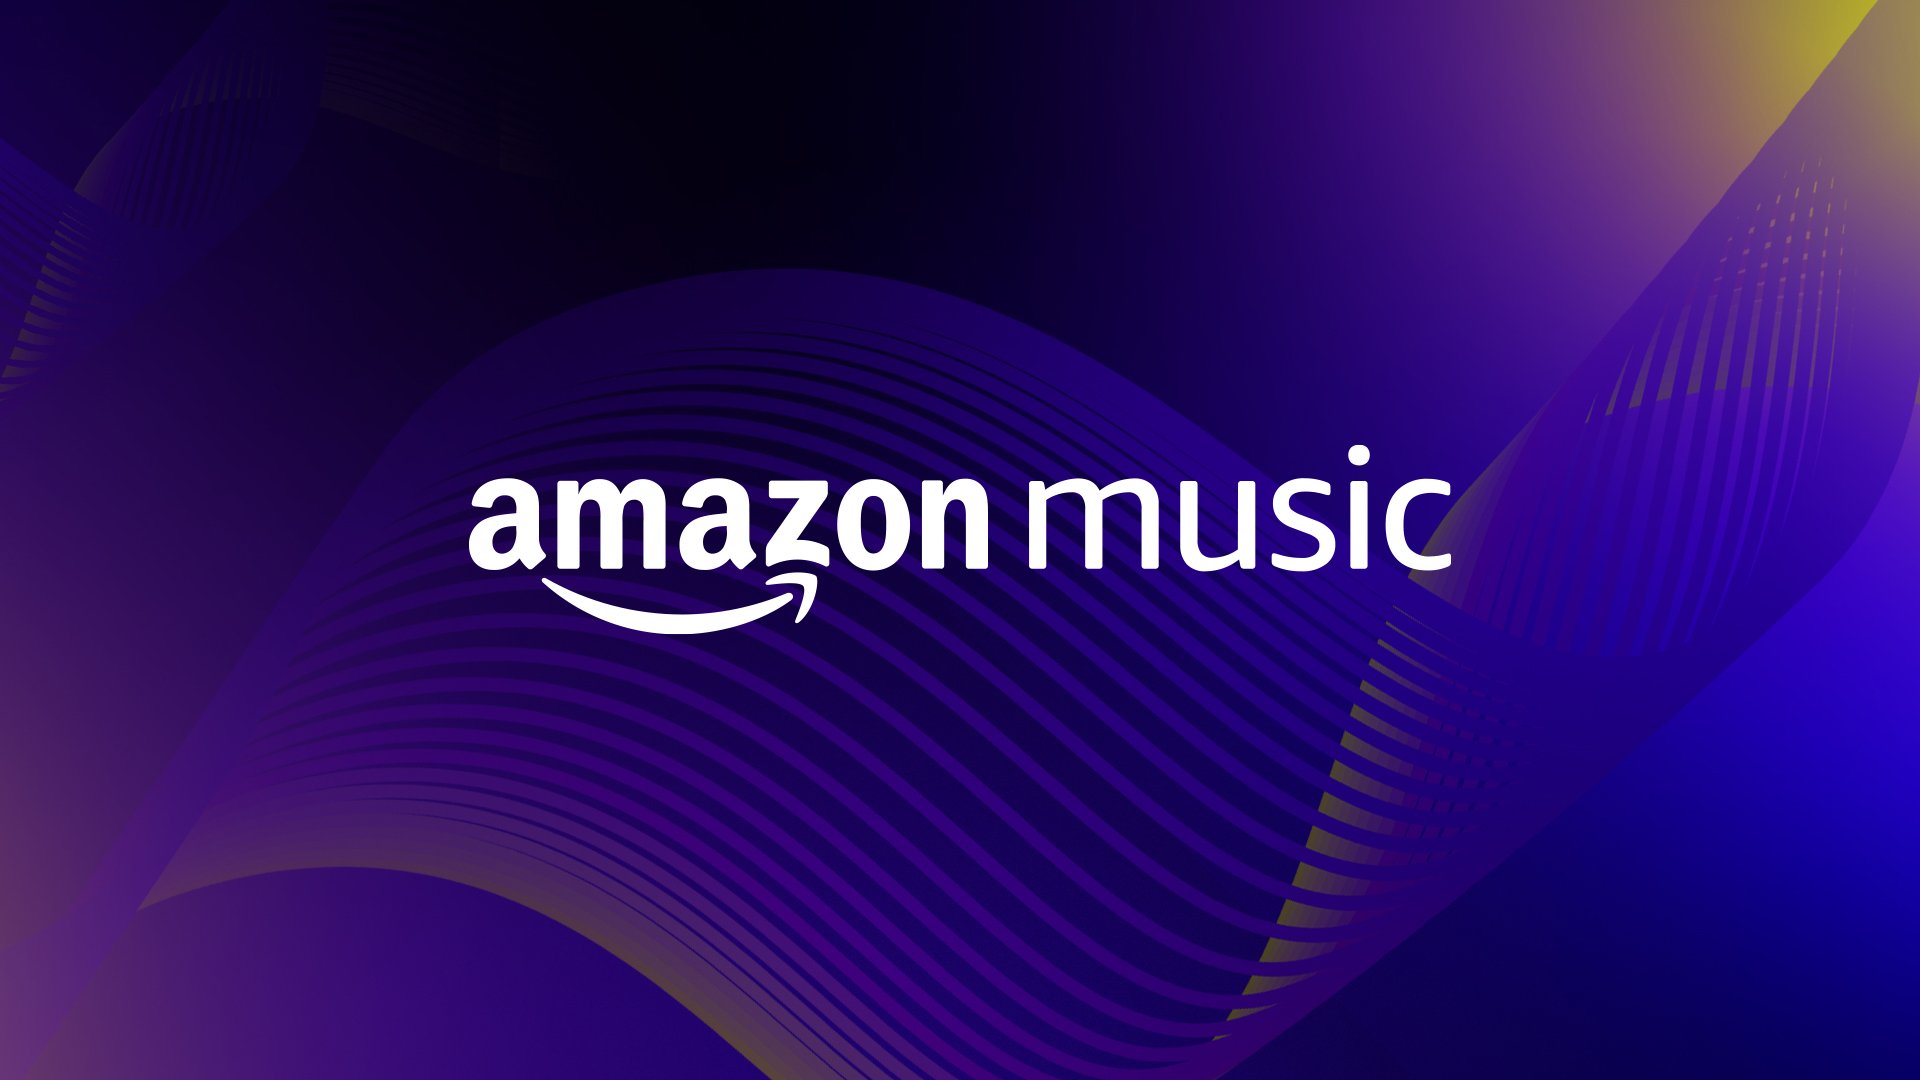 Amazon Music Unlimited with Dolby Atmos - Dolby